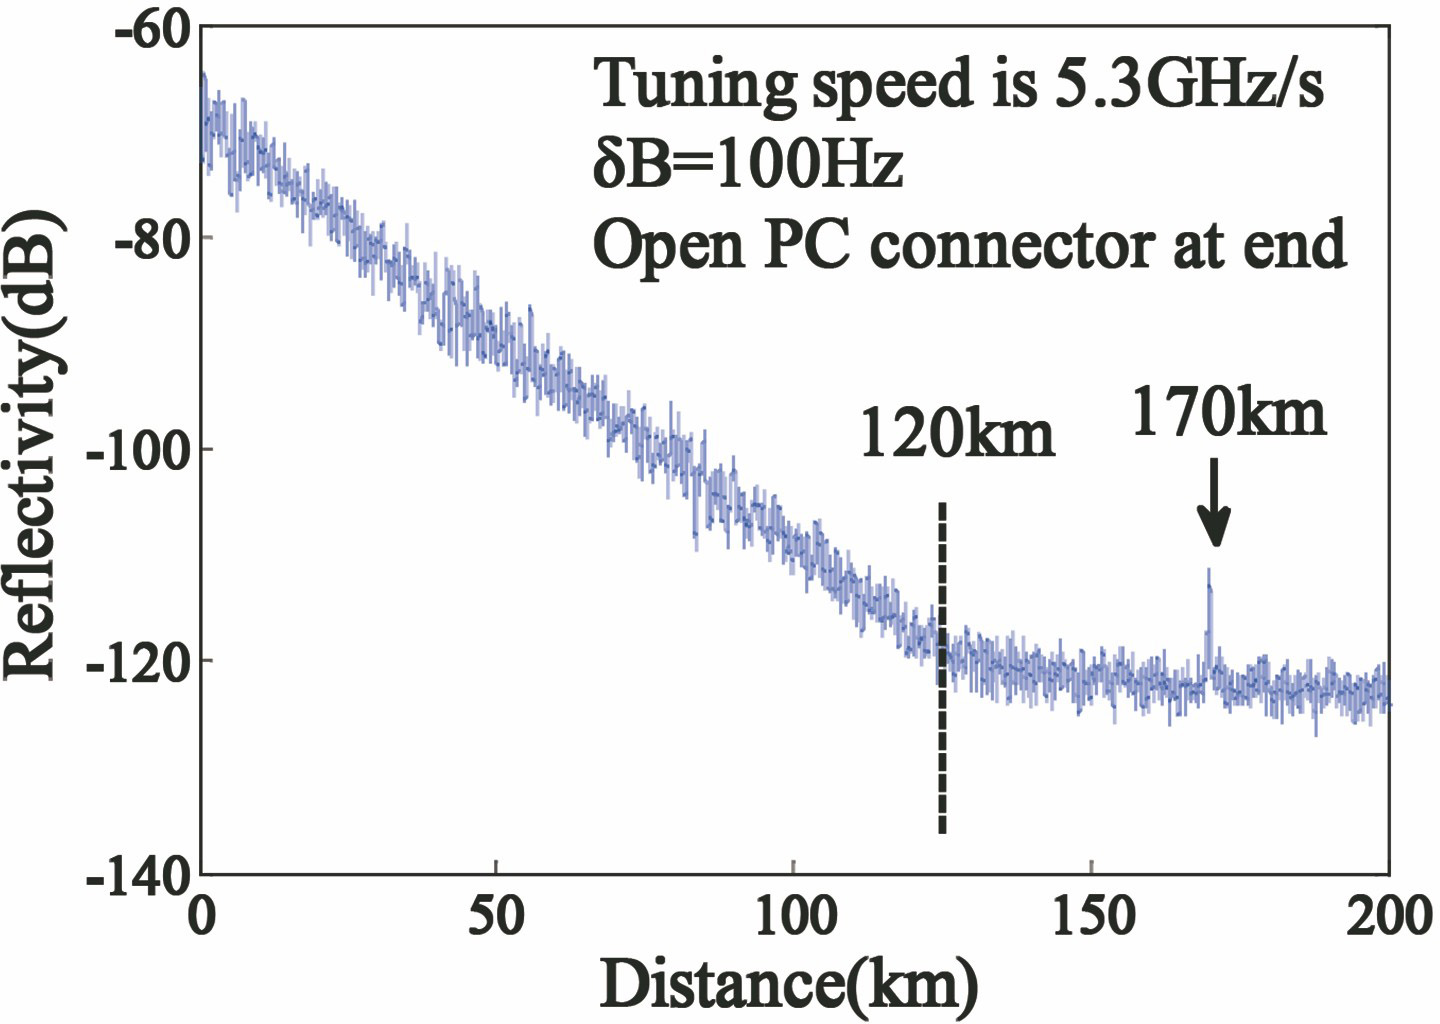 Measured Rayleigh scattering and far-end Fresnel reflection with reflectivity of -14 dB from FC/PC connector for 170 km[22]